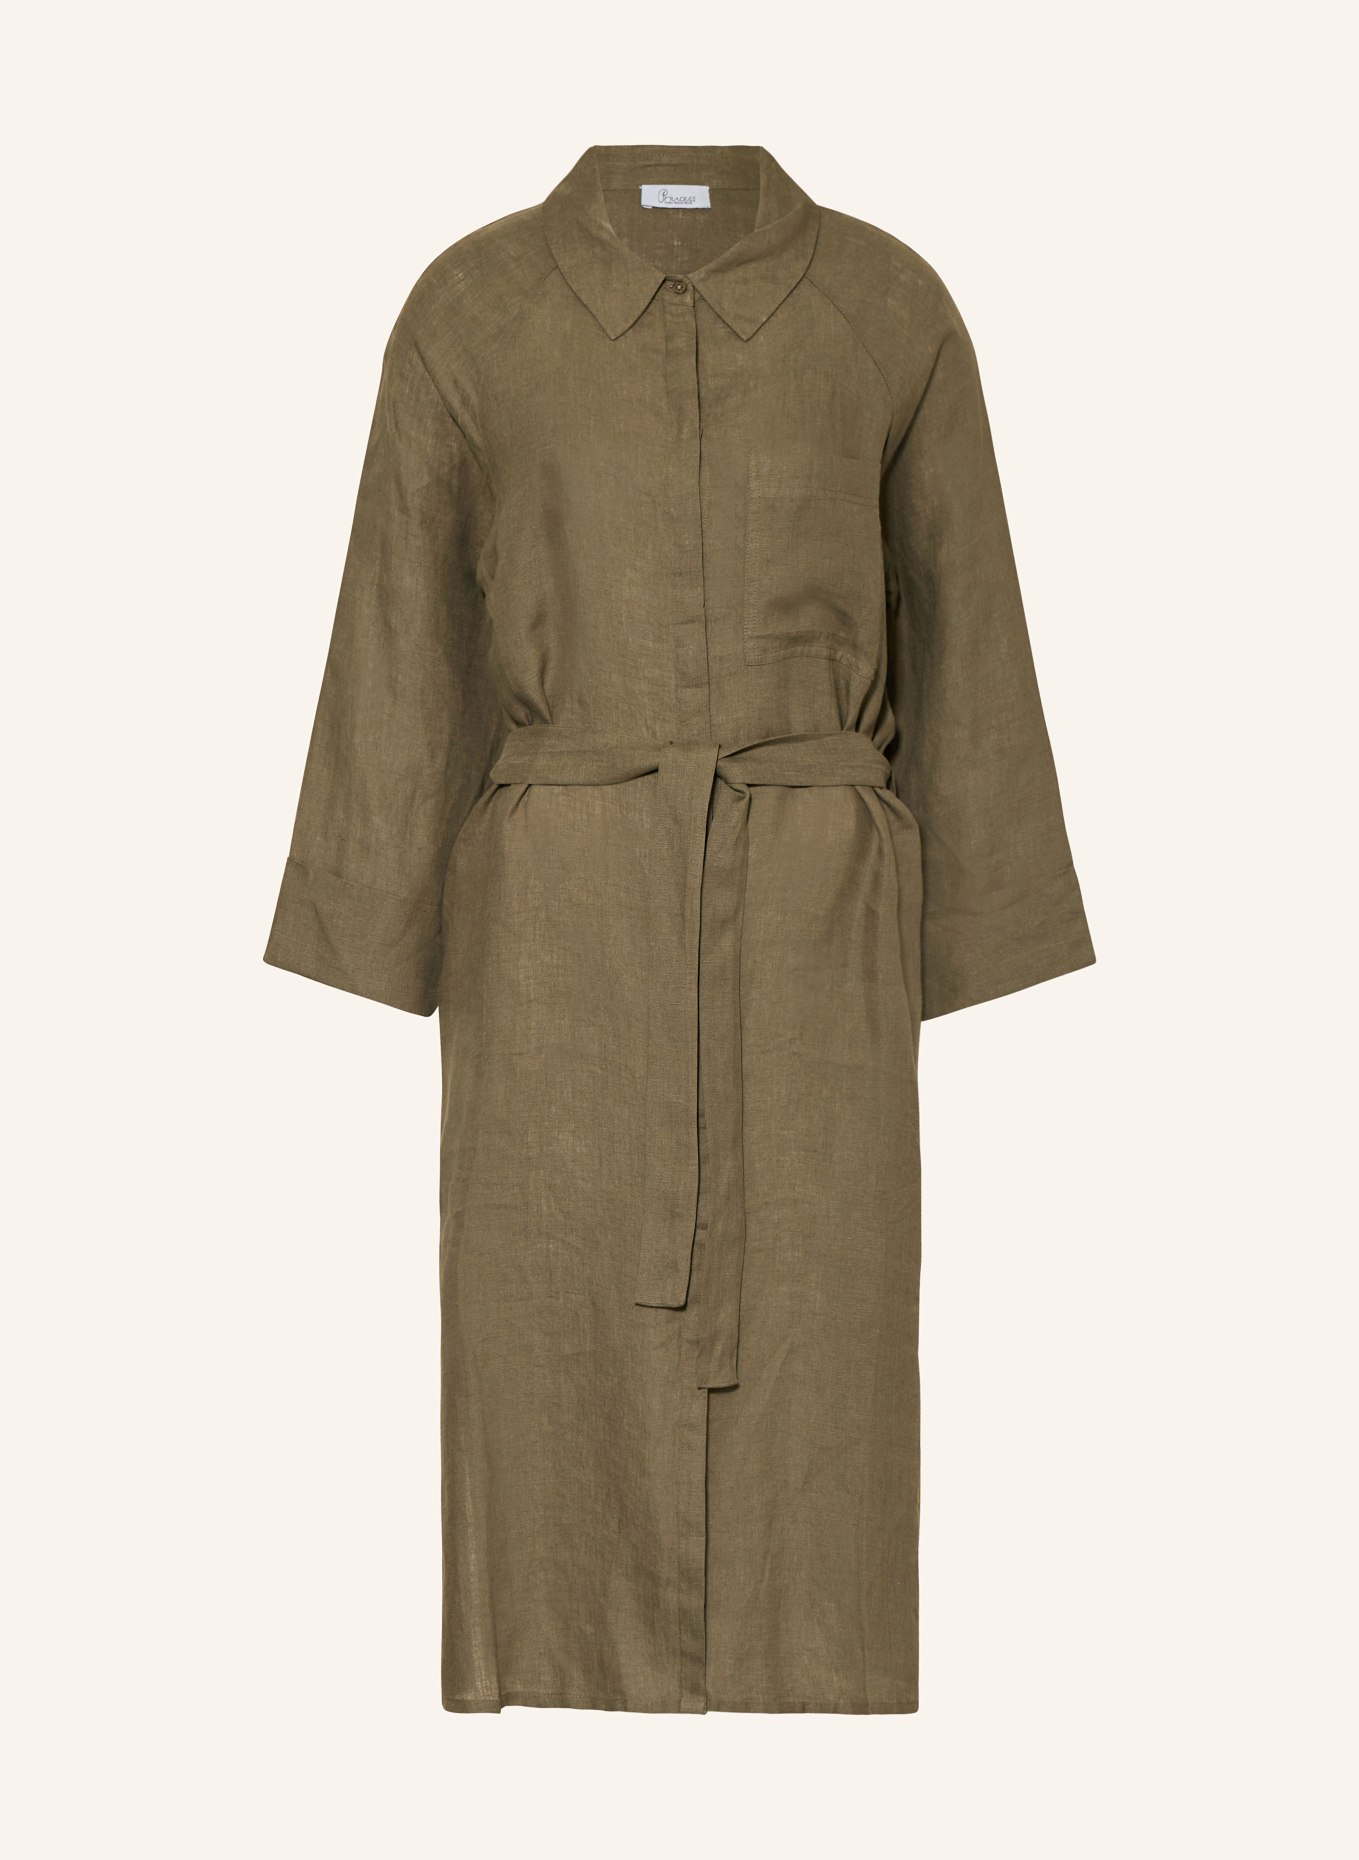 Princess GOES HOLLYWOOD Shirt dress made of linen with 3/4 sleeves, Color: KHAKI (Image 1)